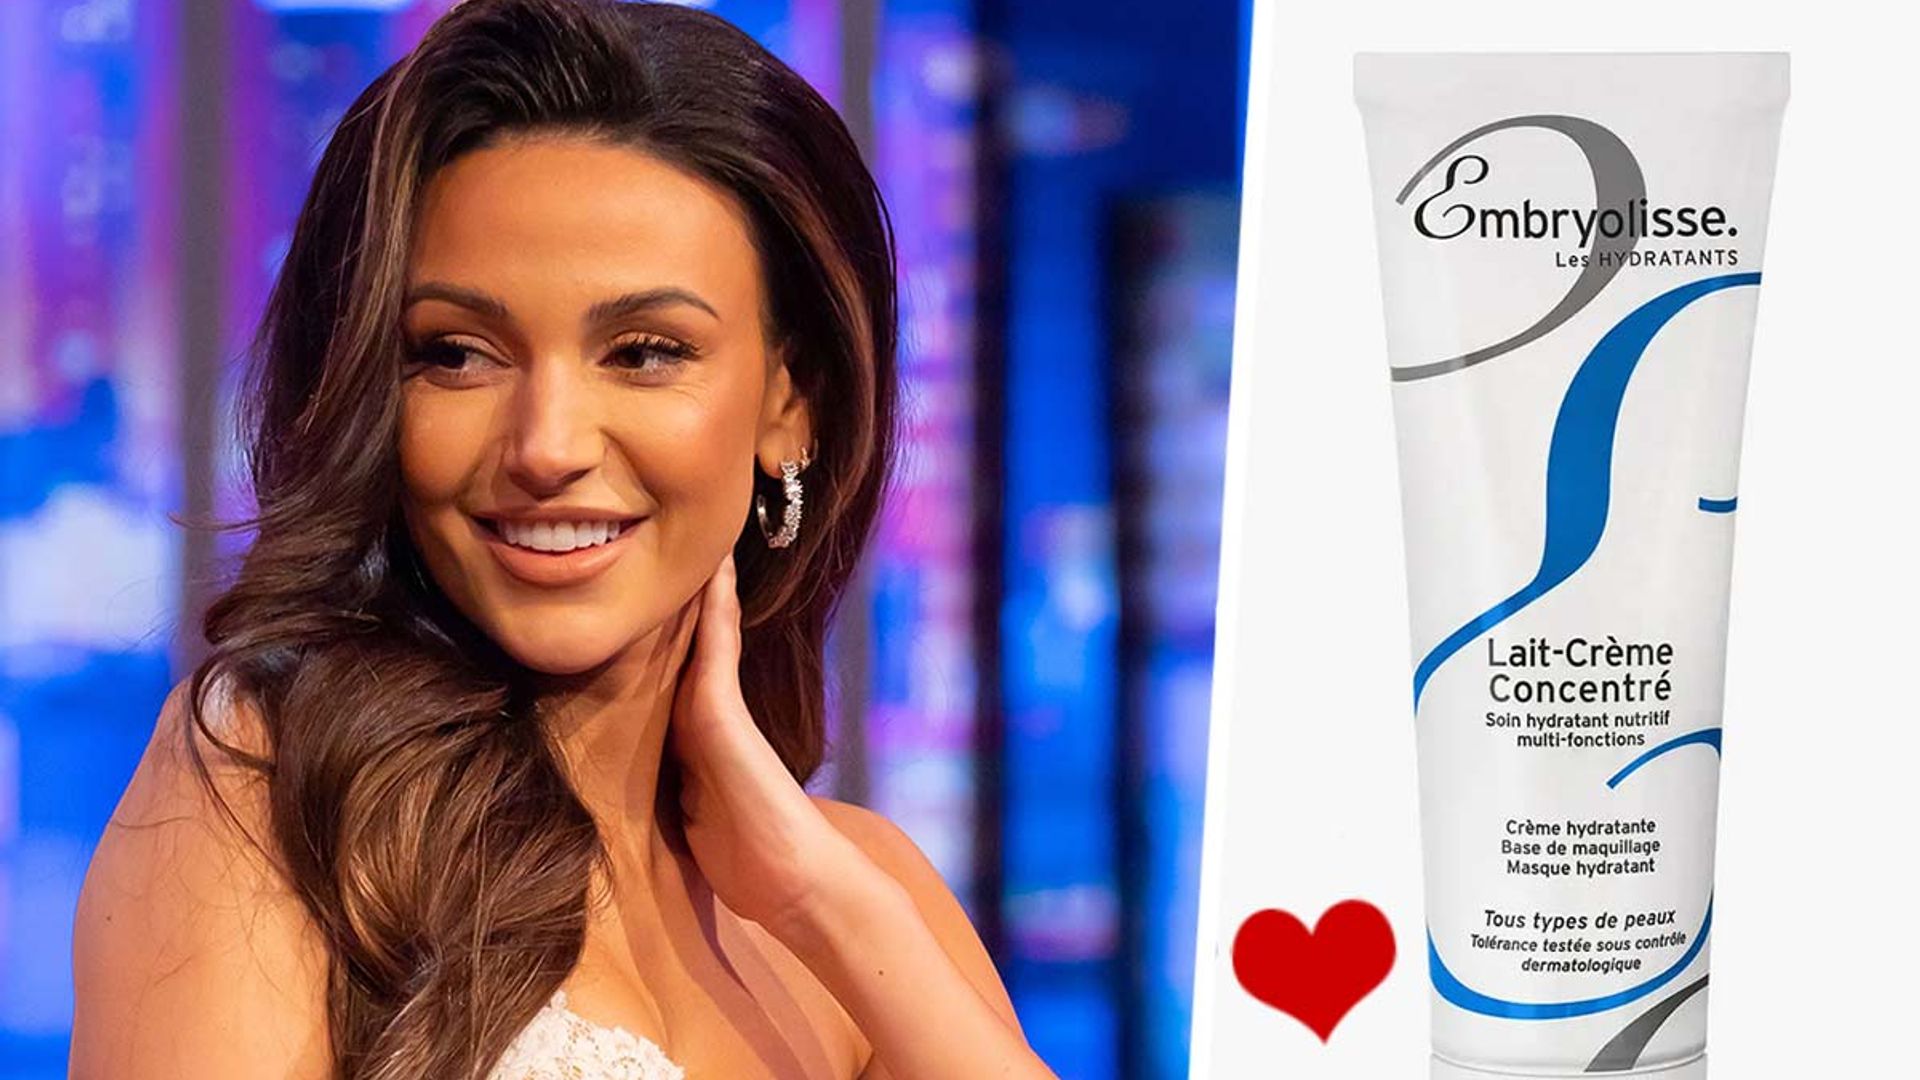 The Embryolisse moisturiser used by Michelle Keegan and Kim Kardashian is just £13 - so affordable!